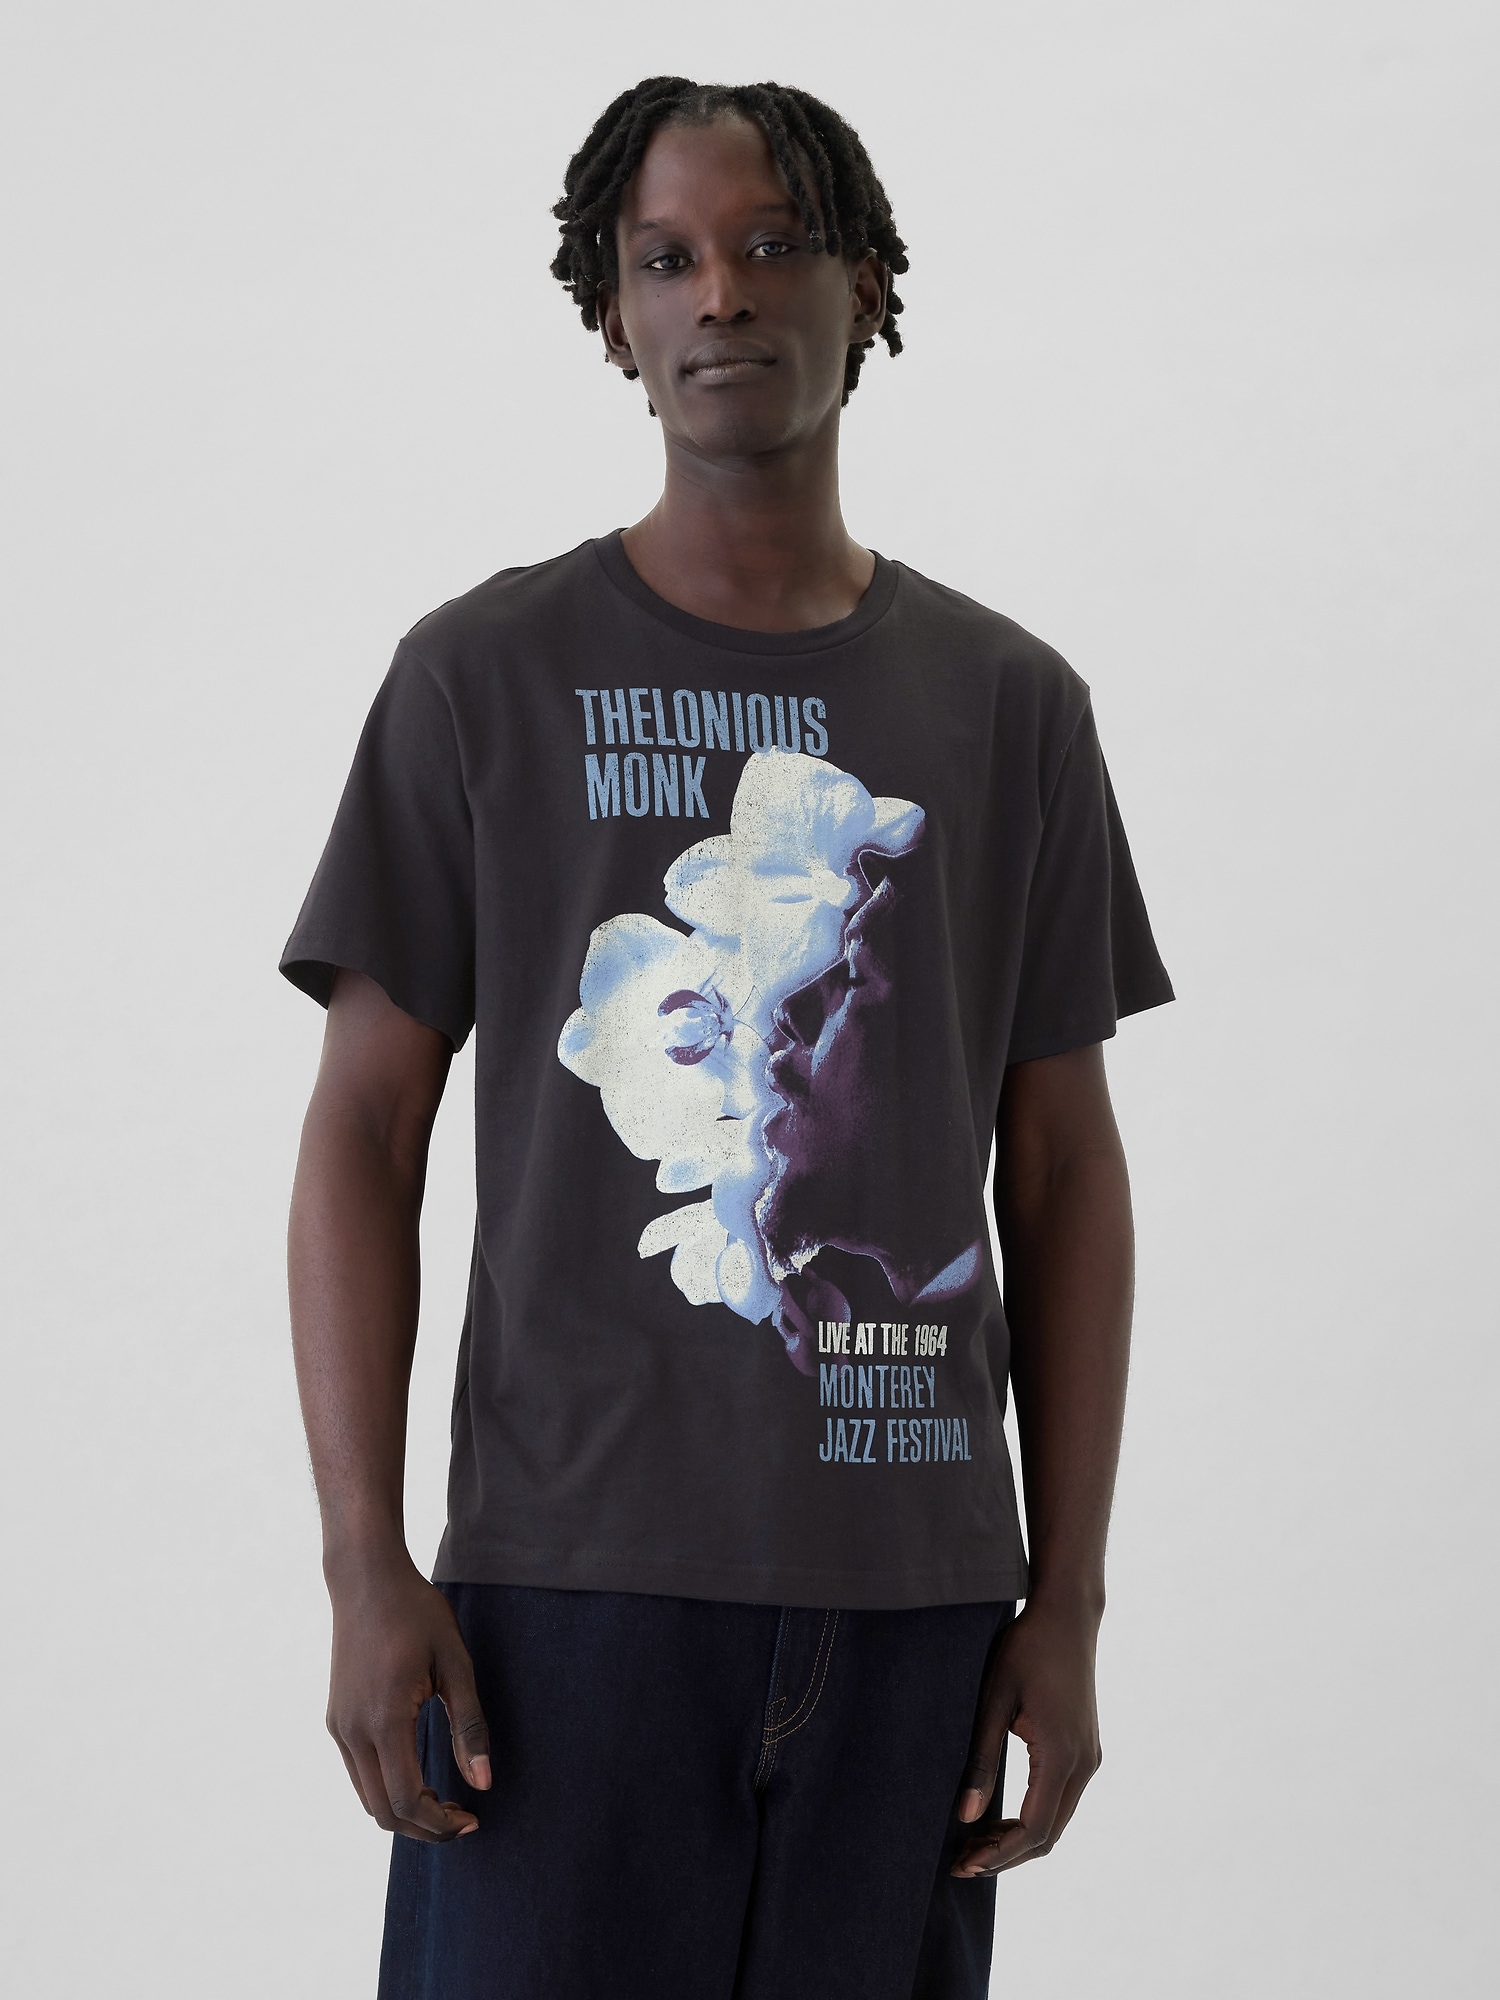 Thelonious Monk Graphic T-Shirt